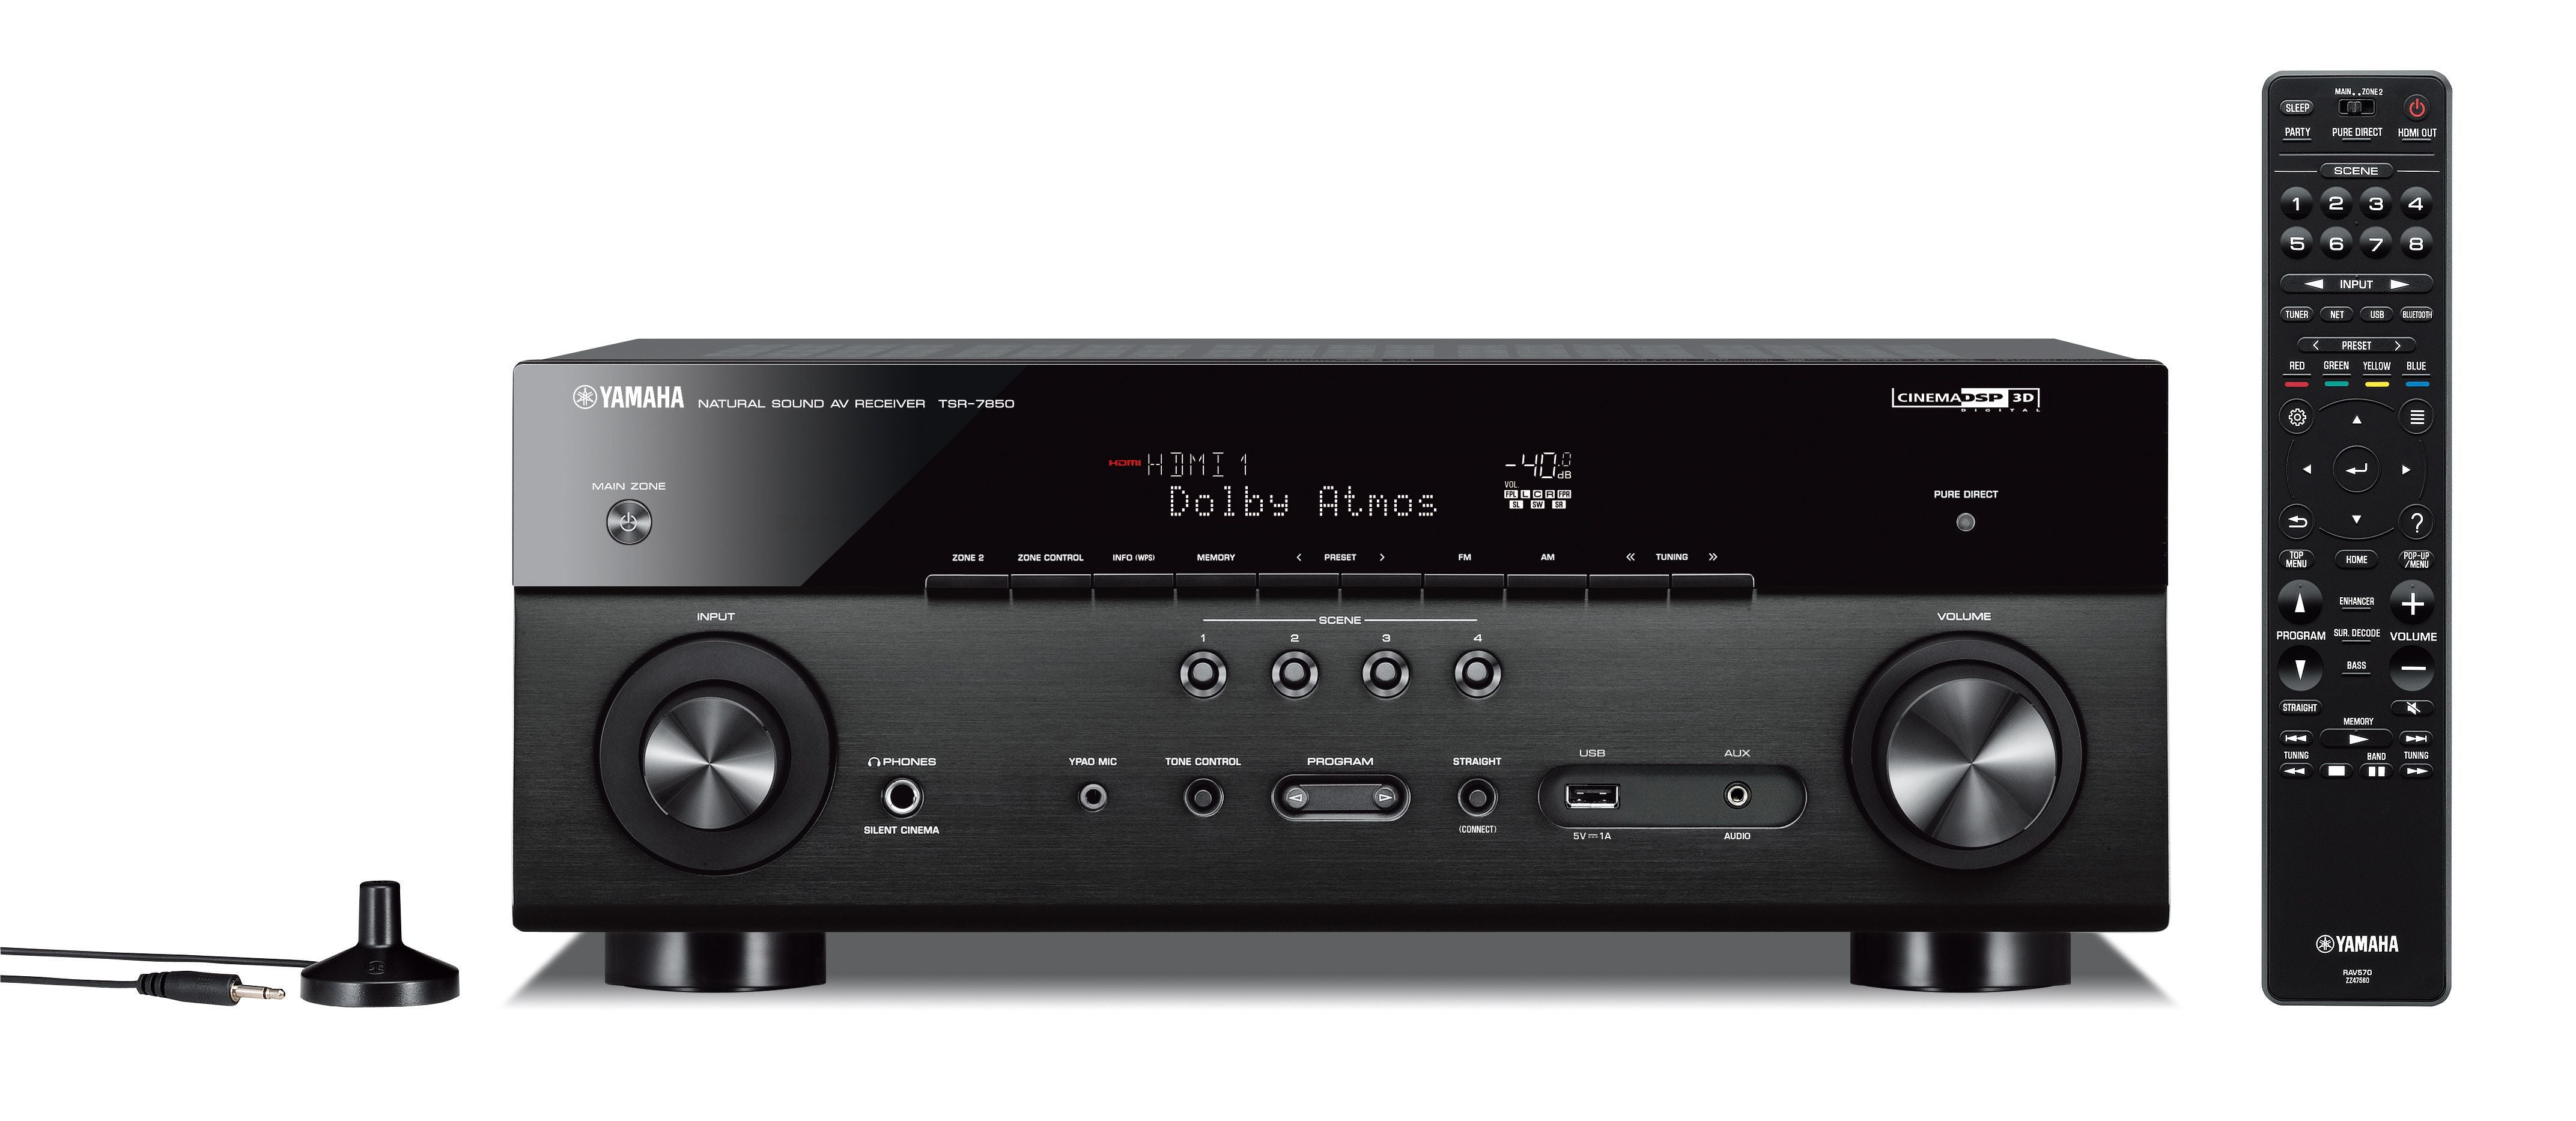 Yamaha TSR-7850R 7.2 ch 4K Atmos DTS Receiver - Certified Refurbished